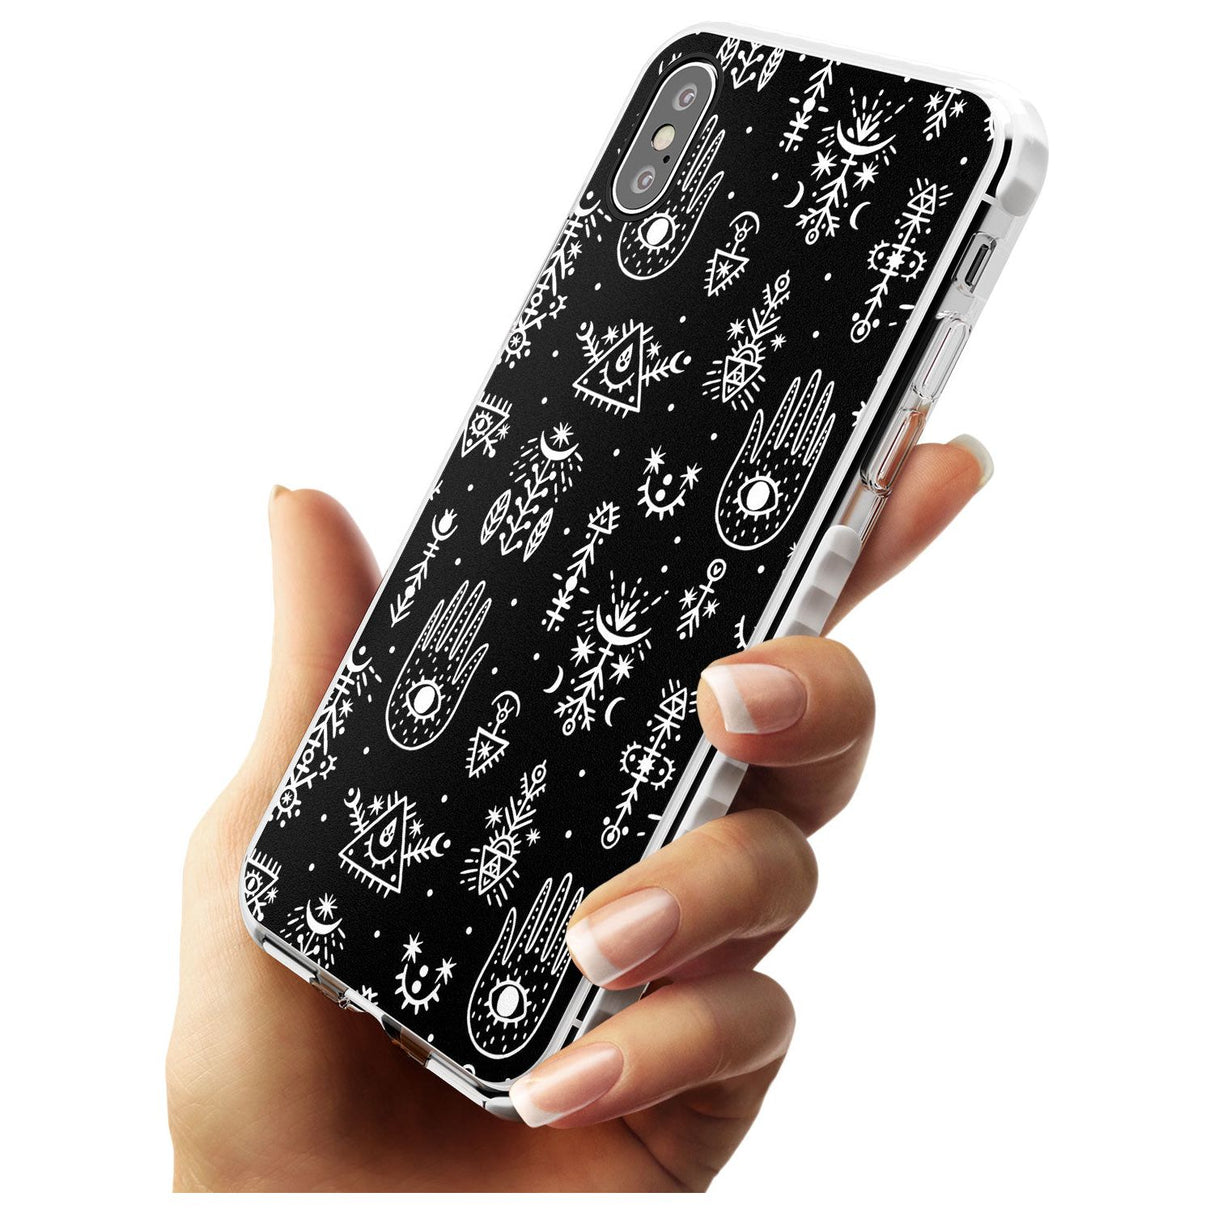 Tribal Palms - White on Black Impact Phone Case for iPhone X XS Max XR